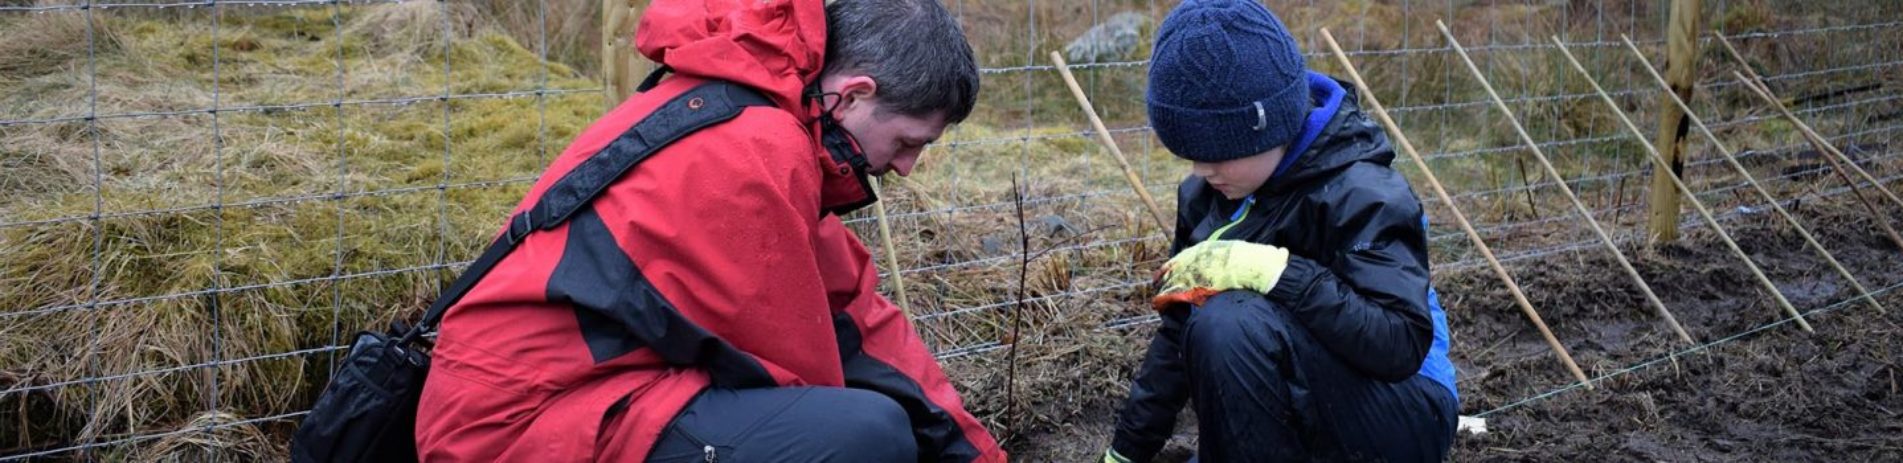 man-with-dark-hair-wearing-red-jacket-helps-young-boy-wearing-blue-hat-to-plant-a-tree